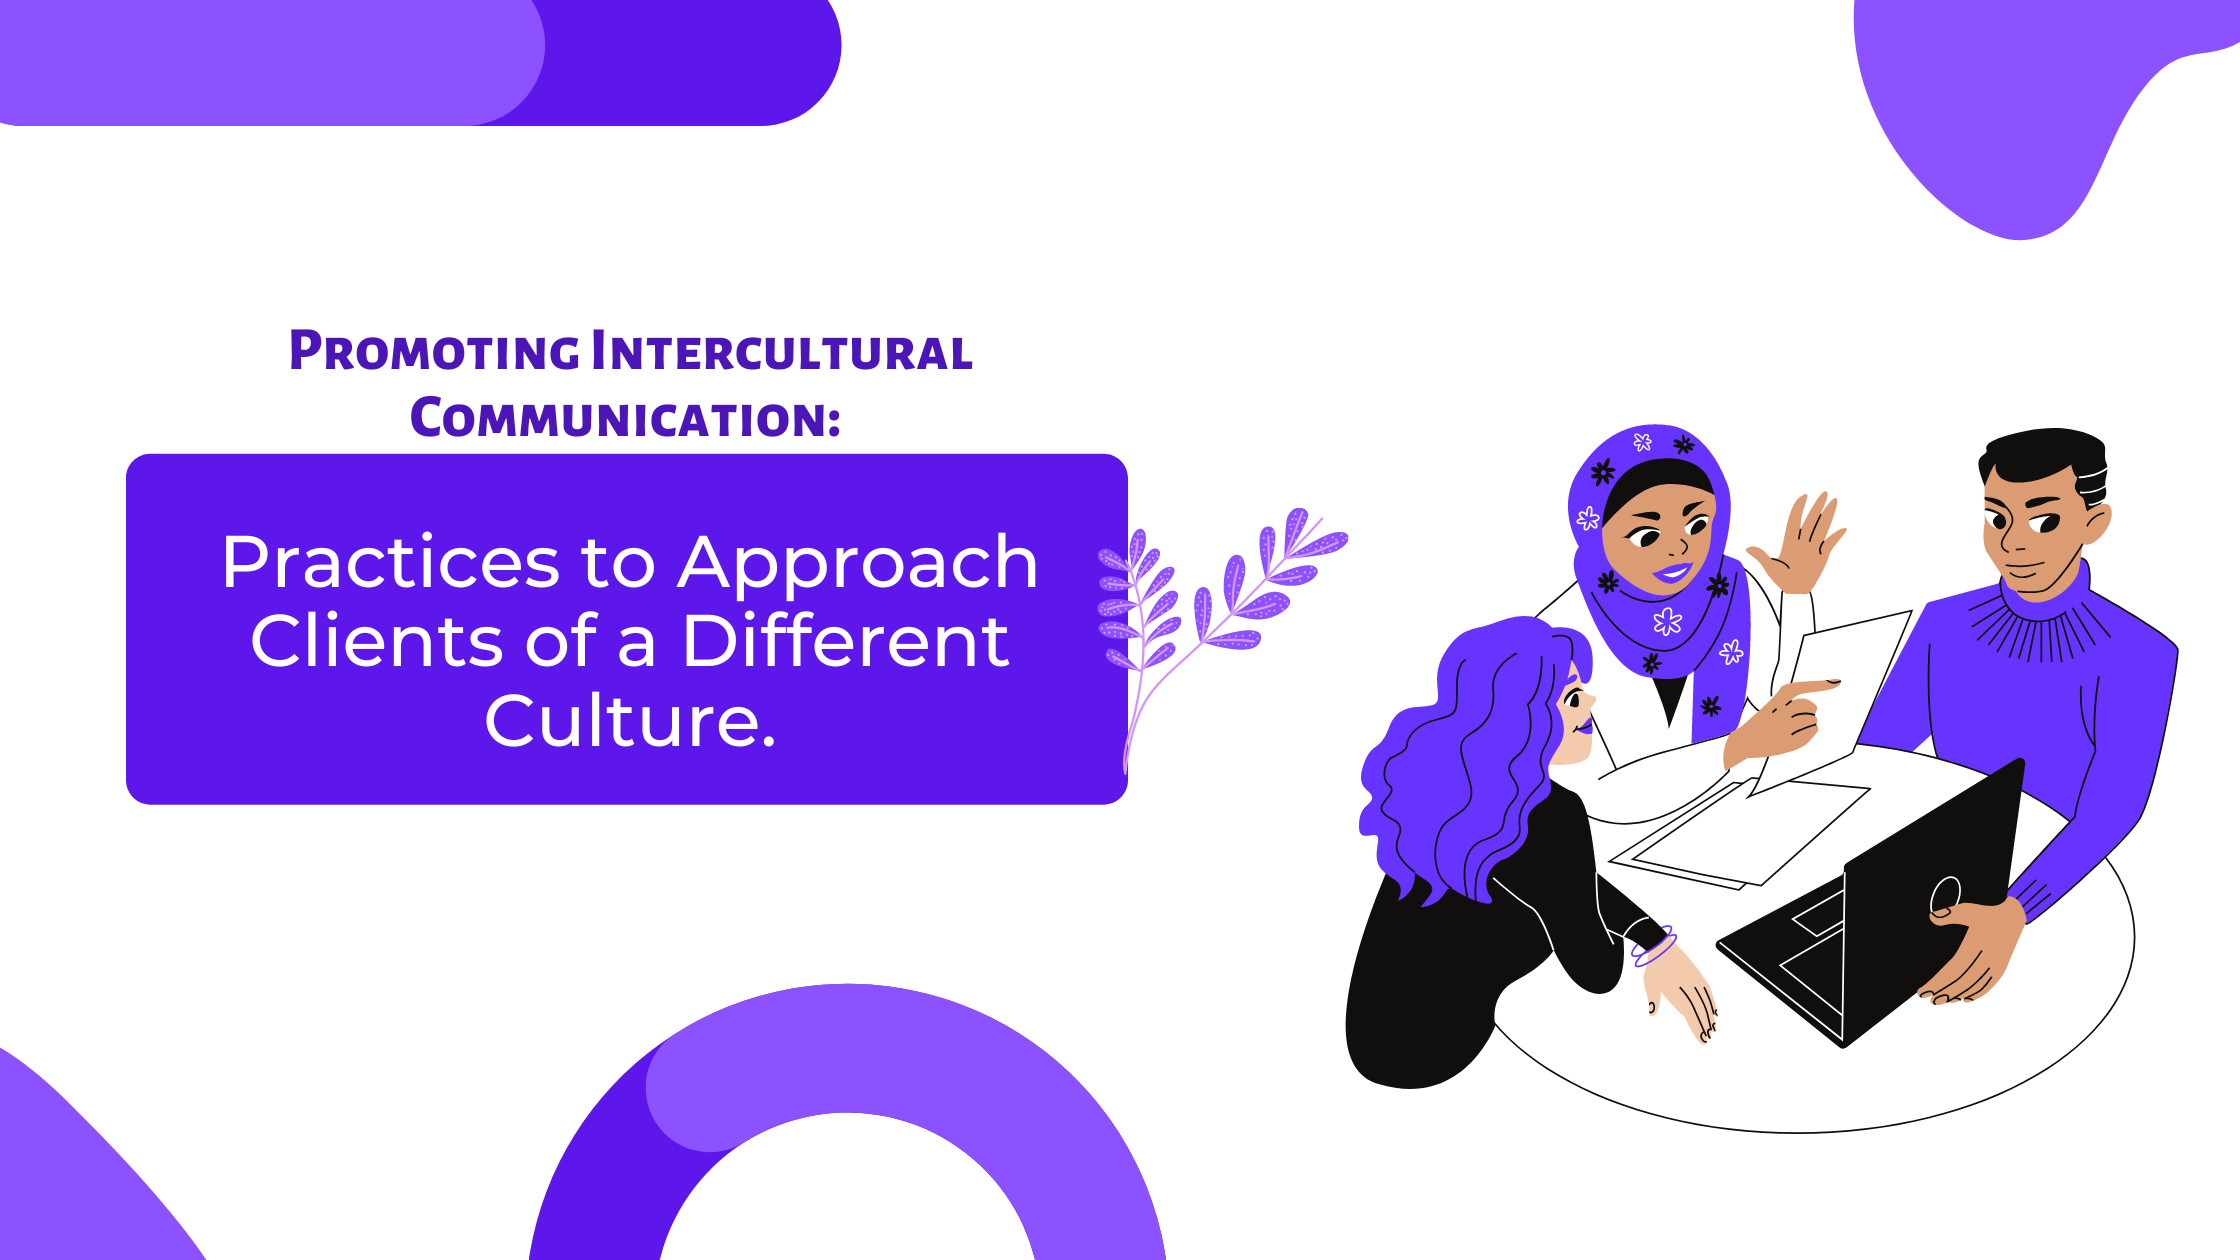 Promoting Intercultural Communication Practices to approach clients of a different culture